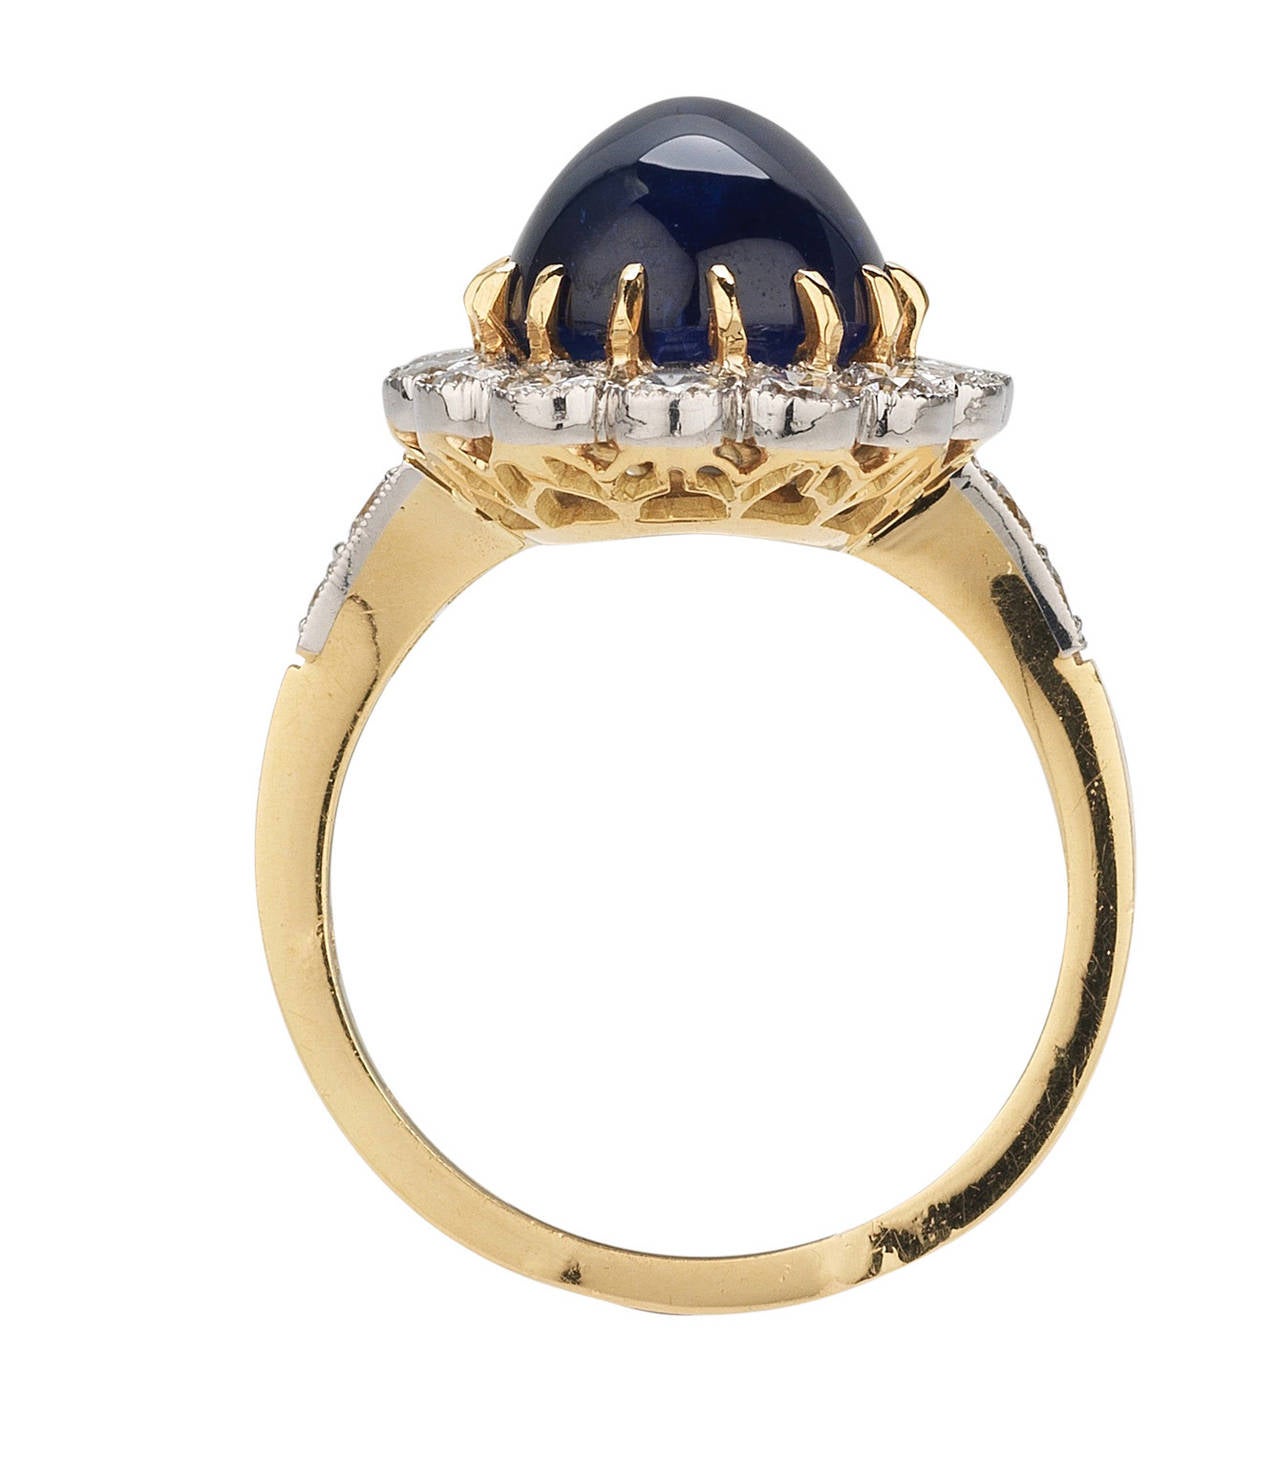 Platinum and yellow gold (18kt) cabochon Sapphire and Diamond Ring. French marks.

Total weight of the diamonds: 1.35 carats
In addition the weight of the center cabochon Sapphire: 8.33 carats
(The Sapphire is natural and heated. It does not